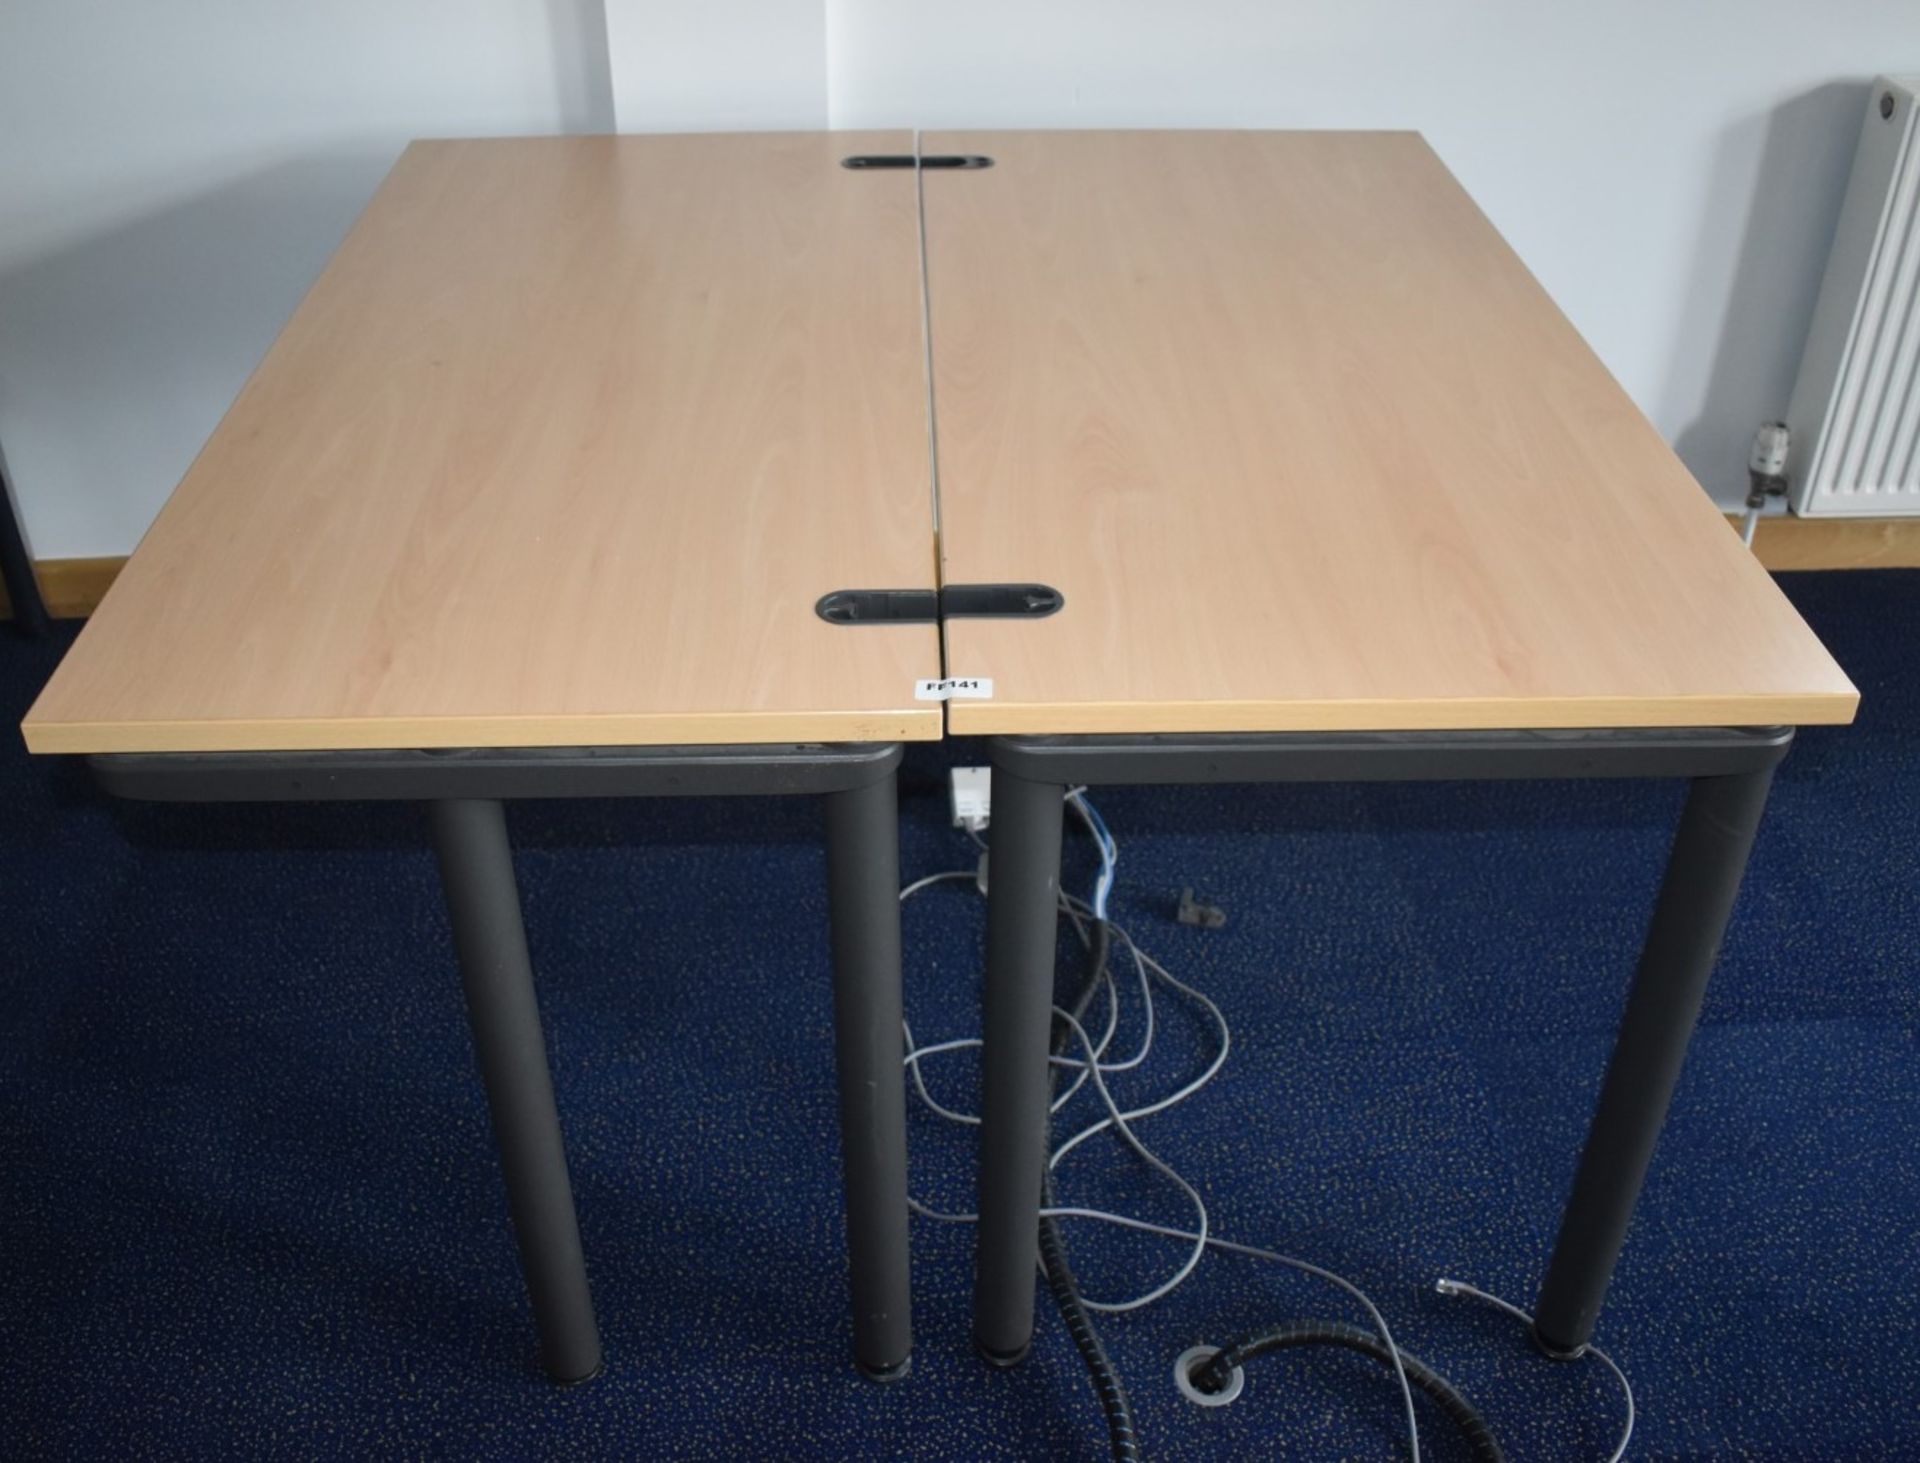 2 x Beech Office Desks With Metal Bases and Cable Tidy Inserts - H72 x W120 x D60 cms - Ref: FF141 U - Image 2 of 3